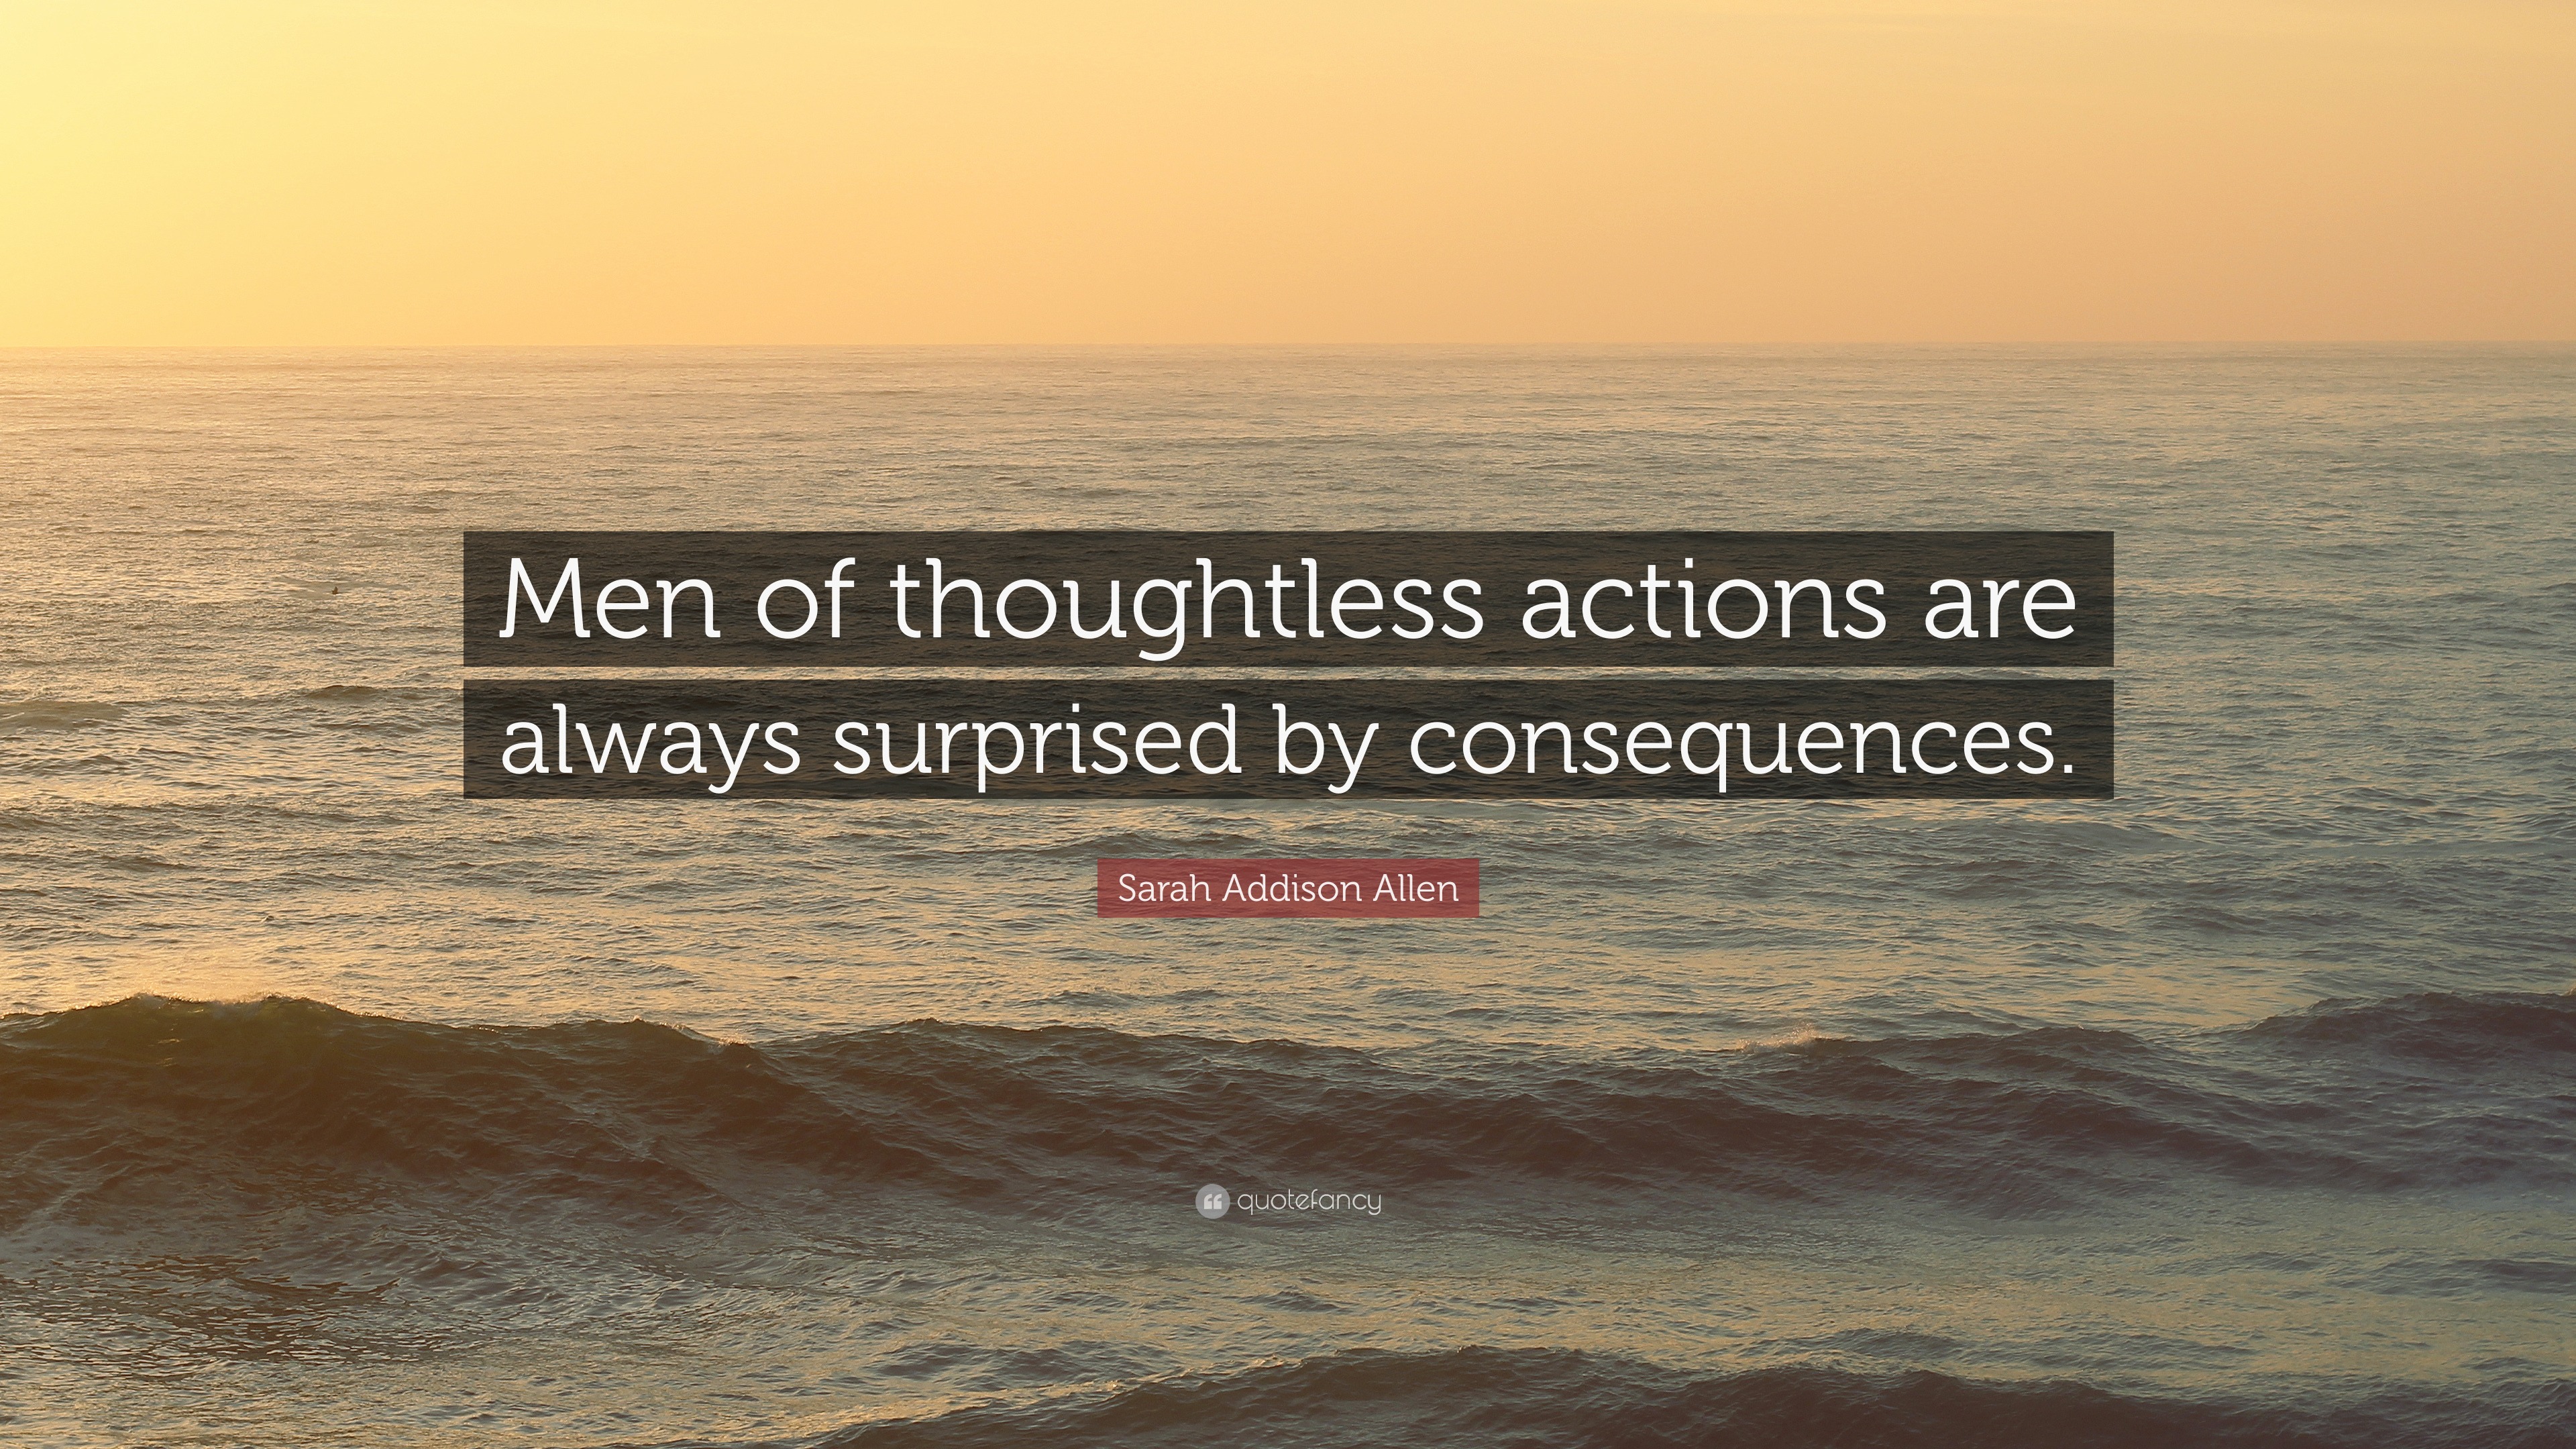 Sarah Addison Allen Quote “Men of thoughtless actions are